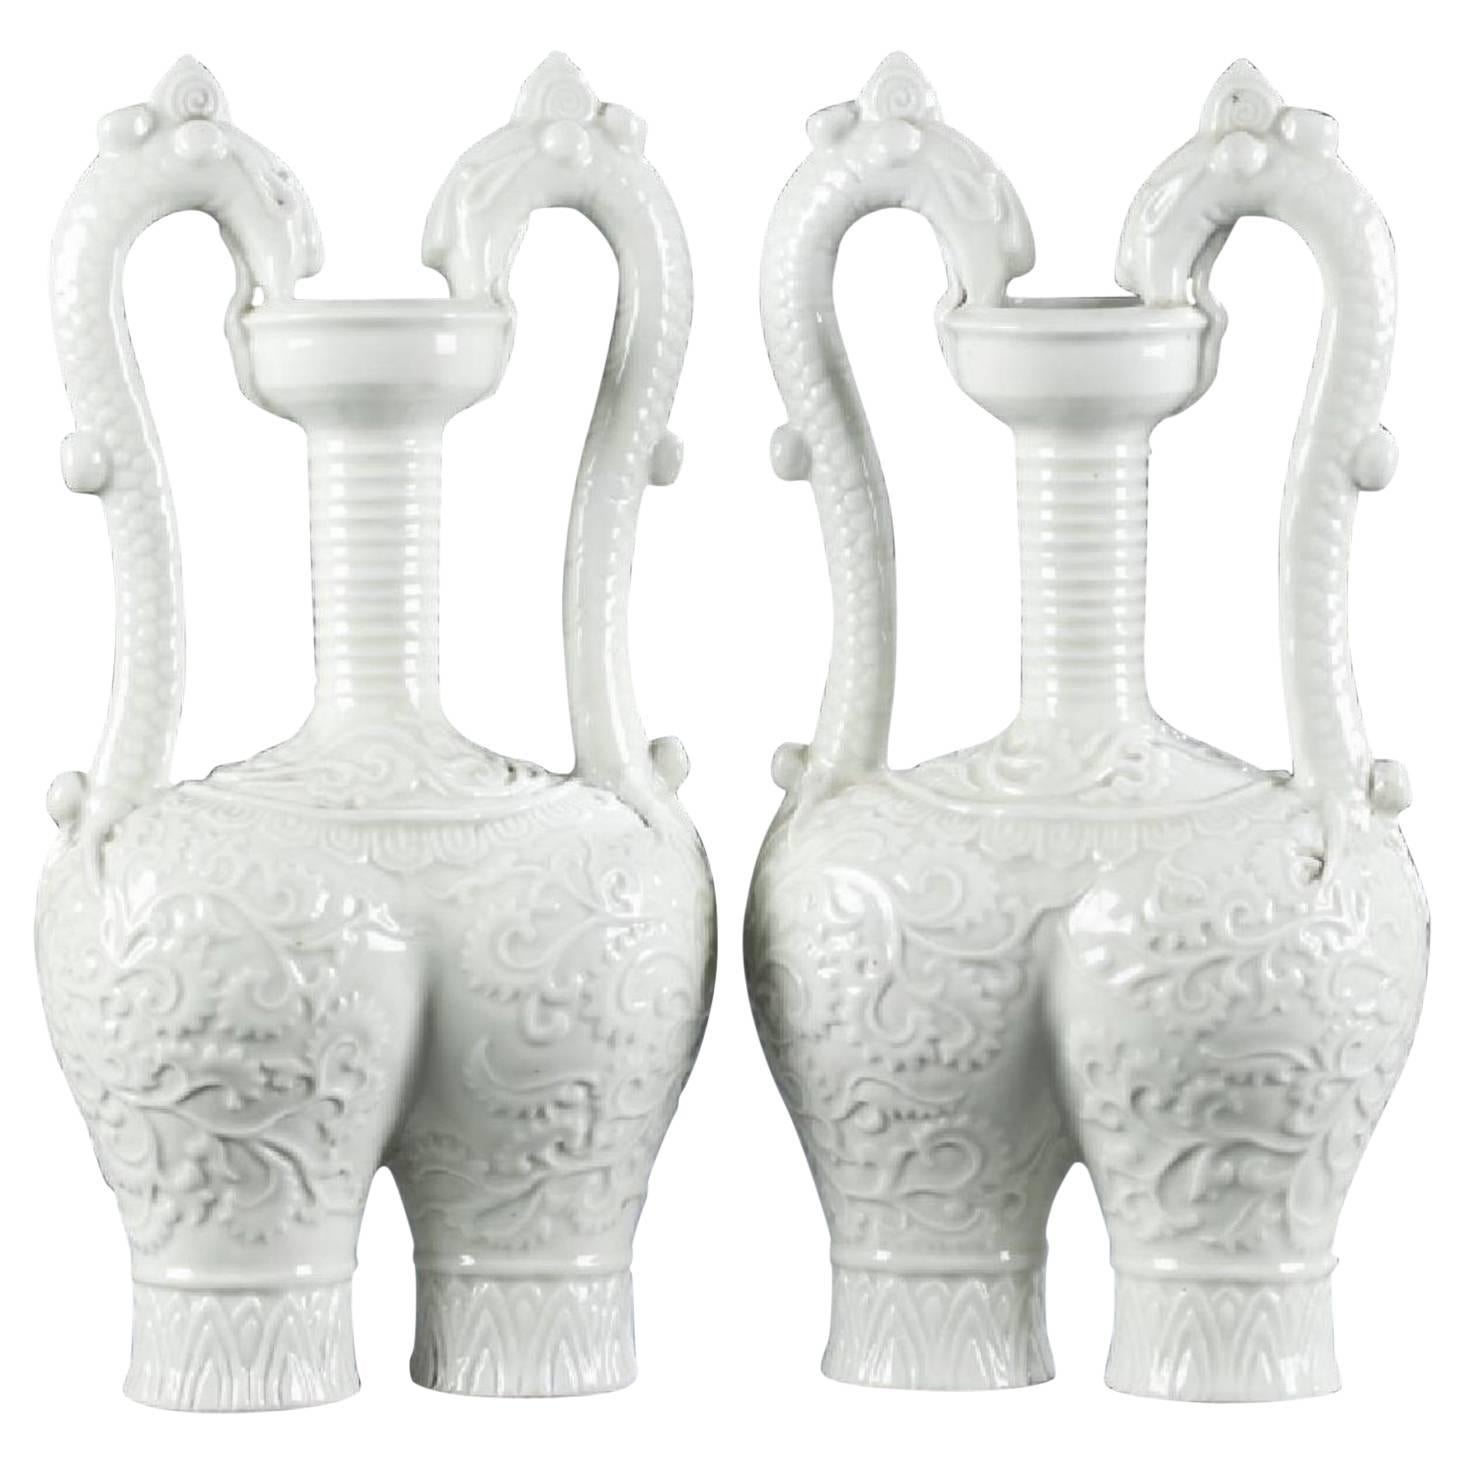 20th Century Blanc de Chine Vases with Unusual Form and Dragon Handles For Sale